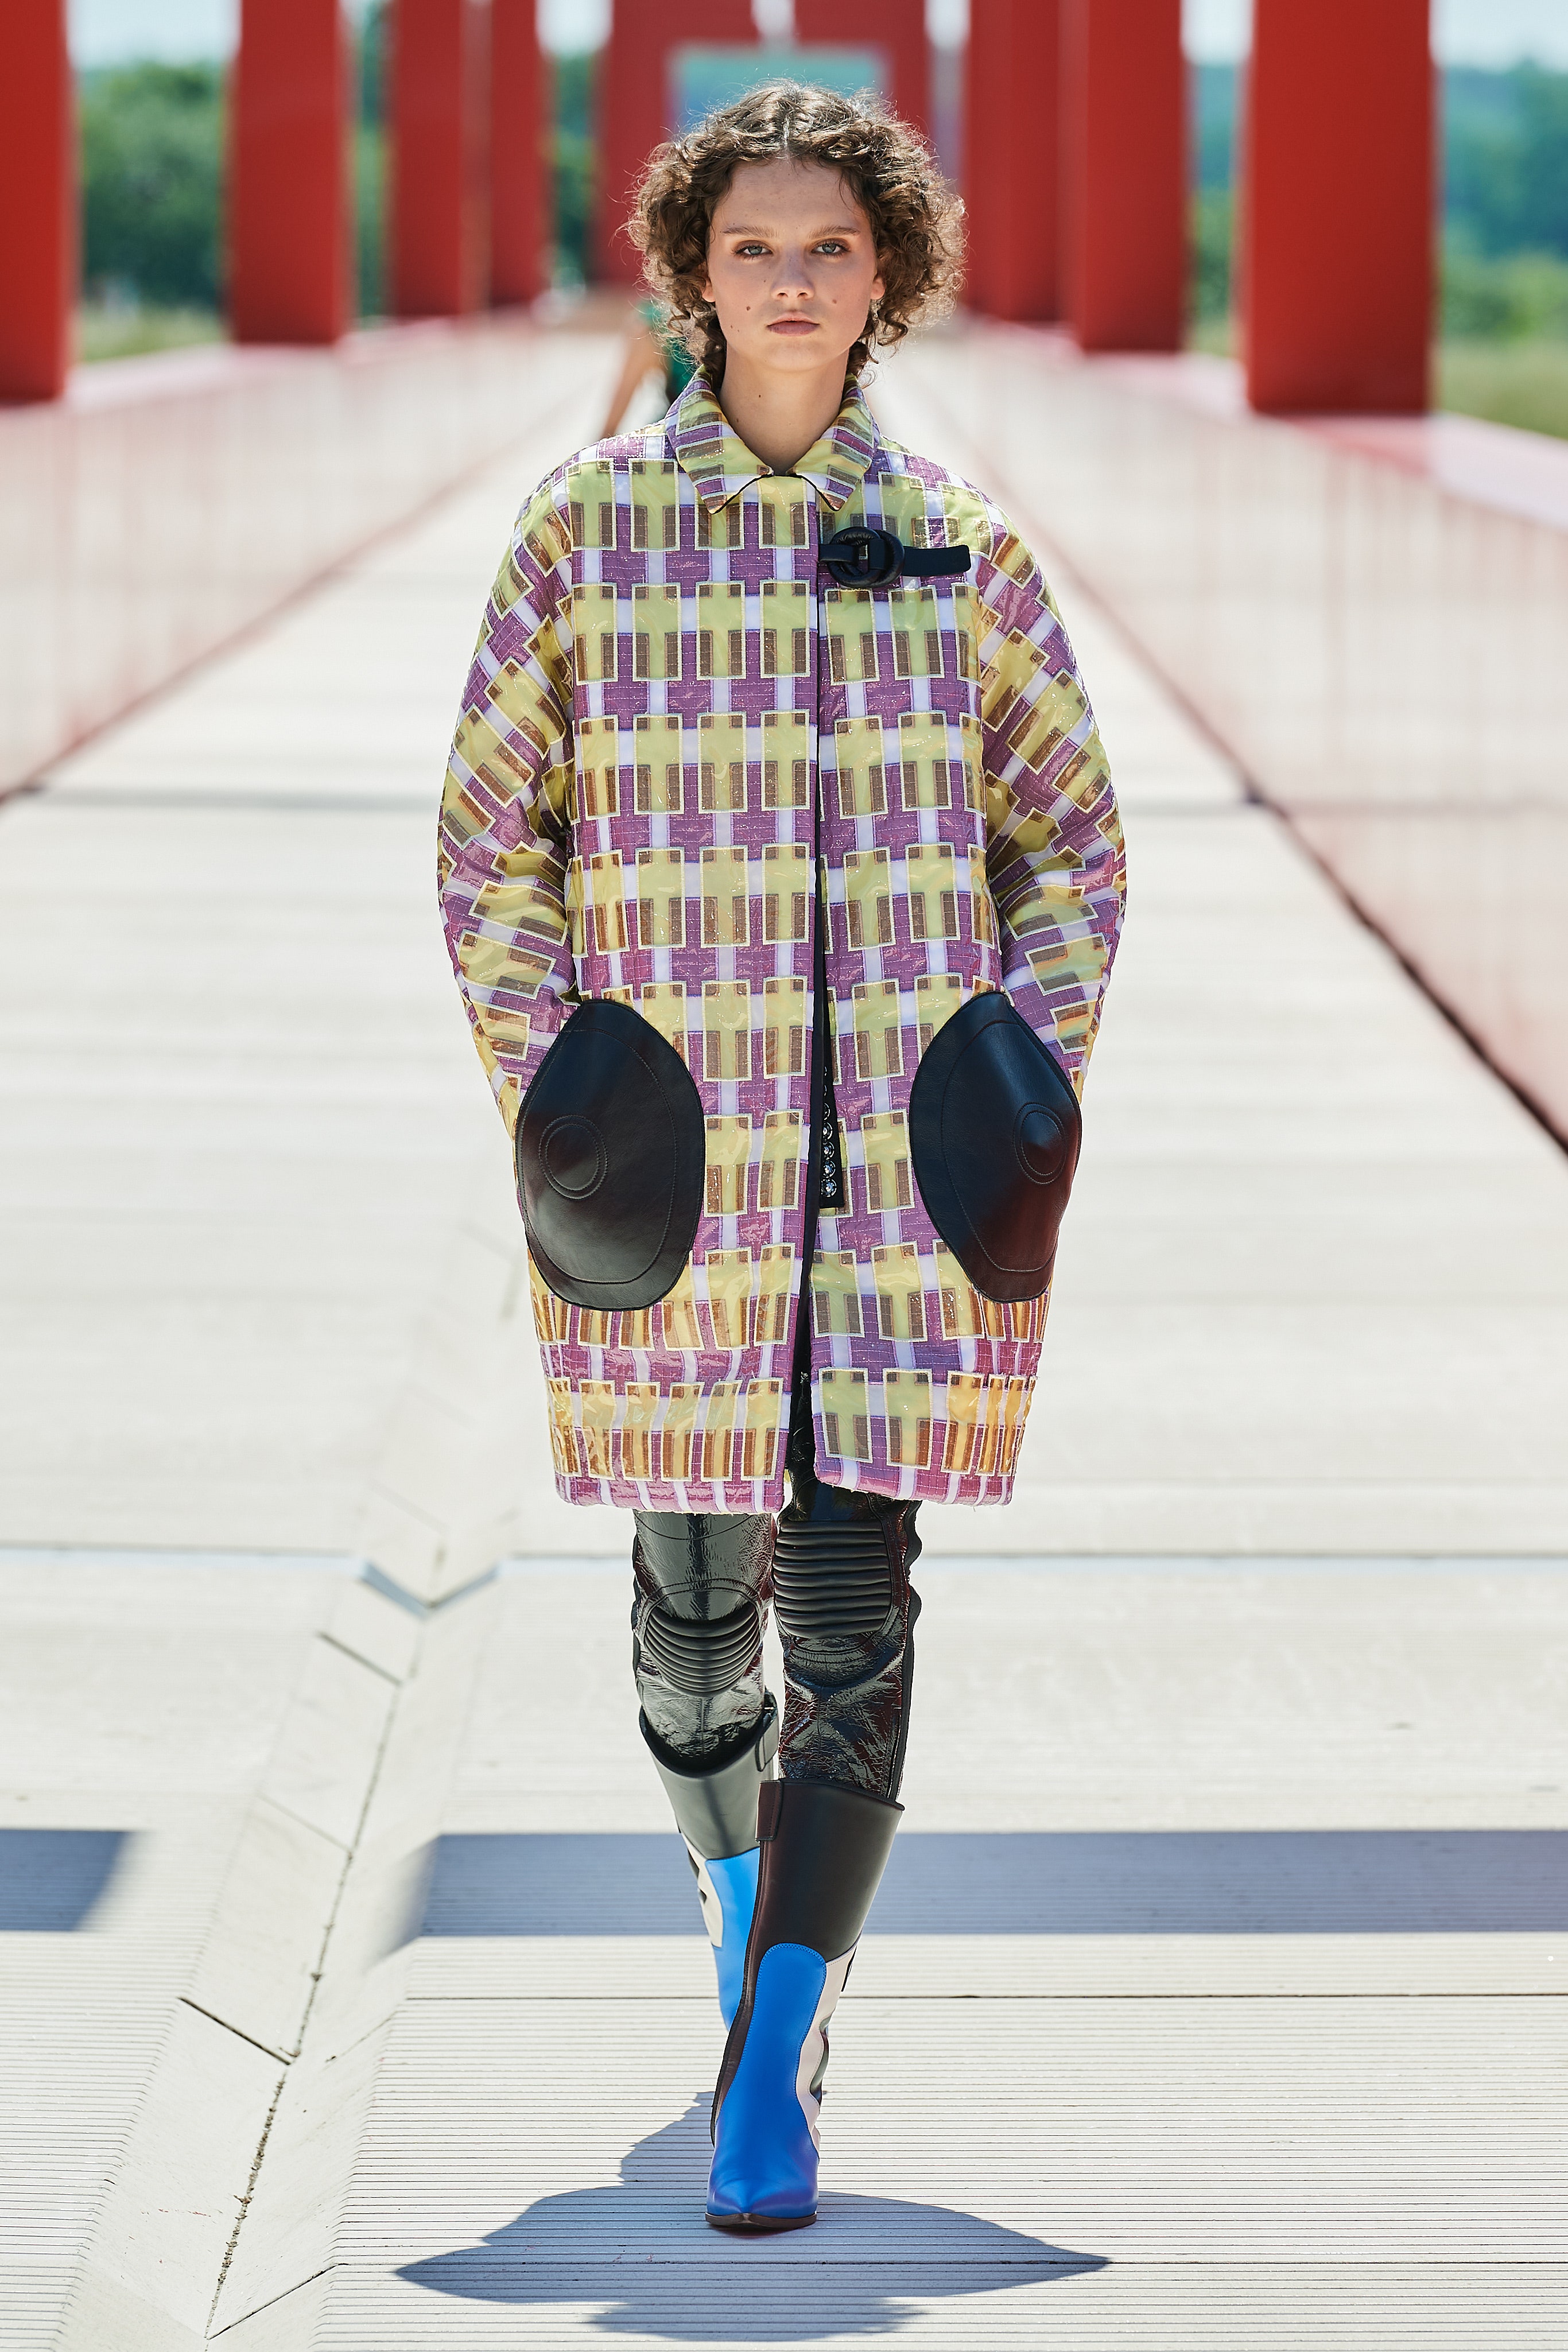 A model on the runway at Louis Vuitton Resort 2015 runway show